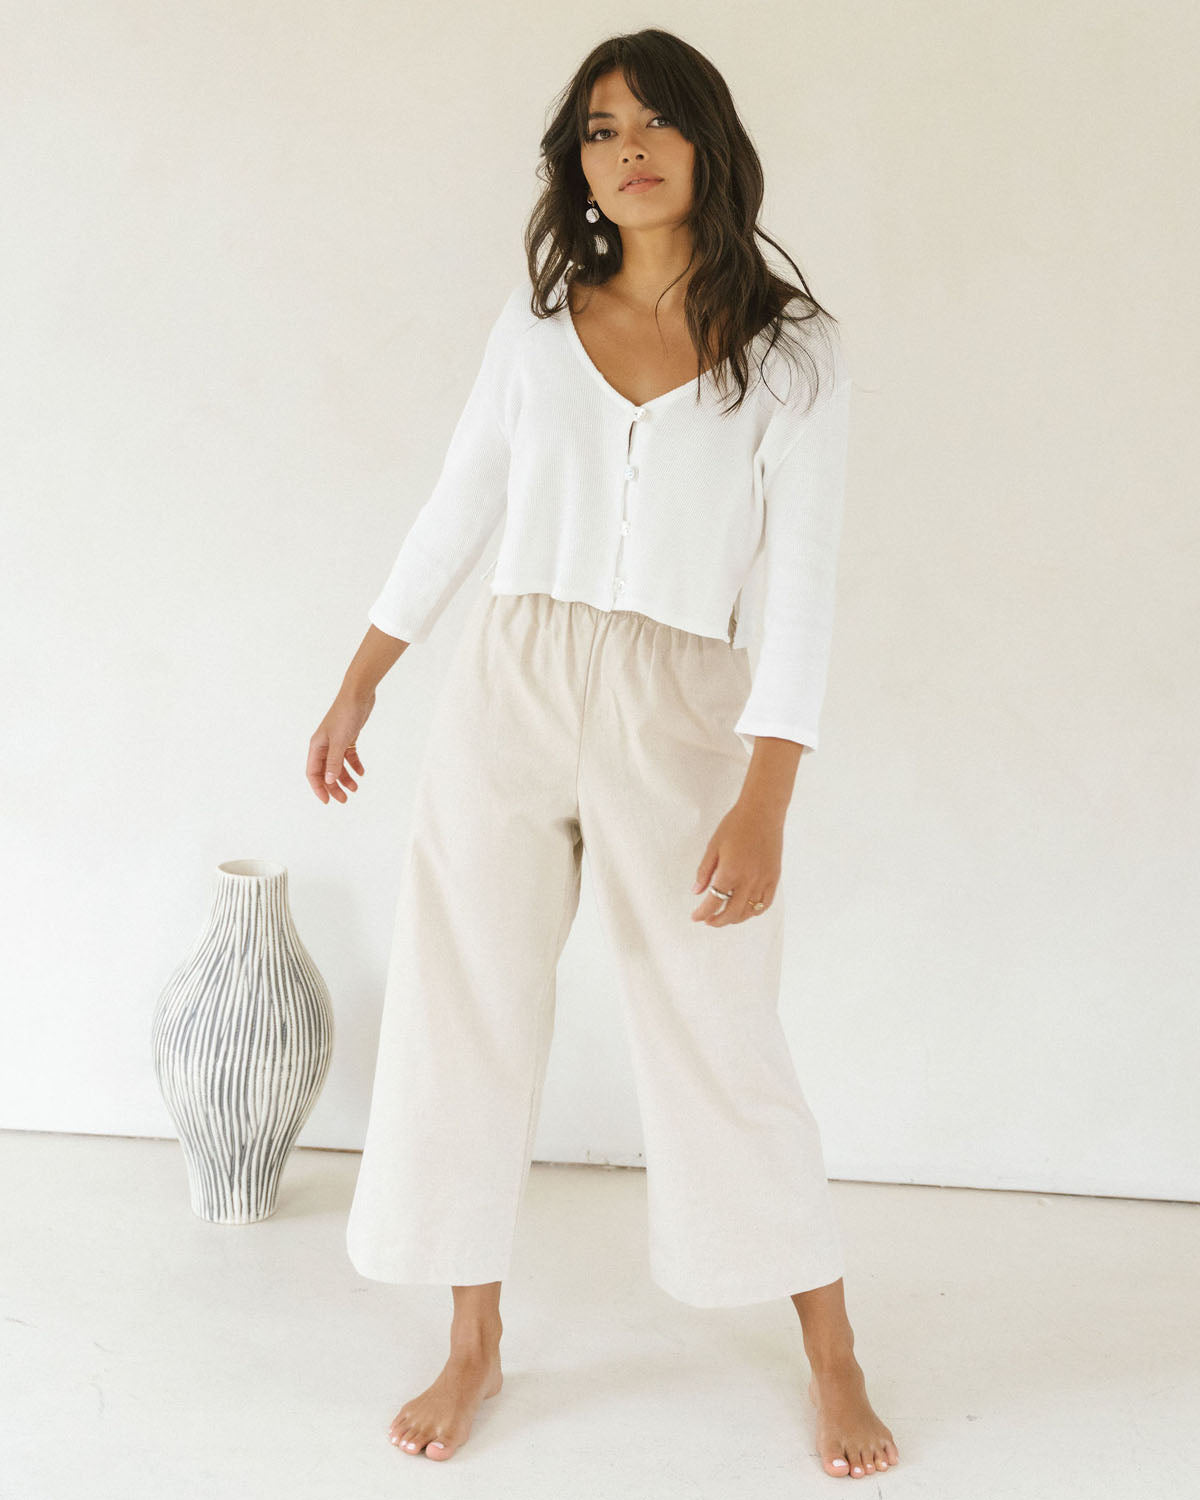 harly jae james blouse in white handmade in Vancouver with organic cotton